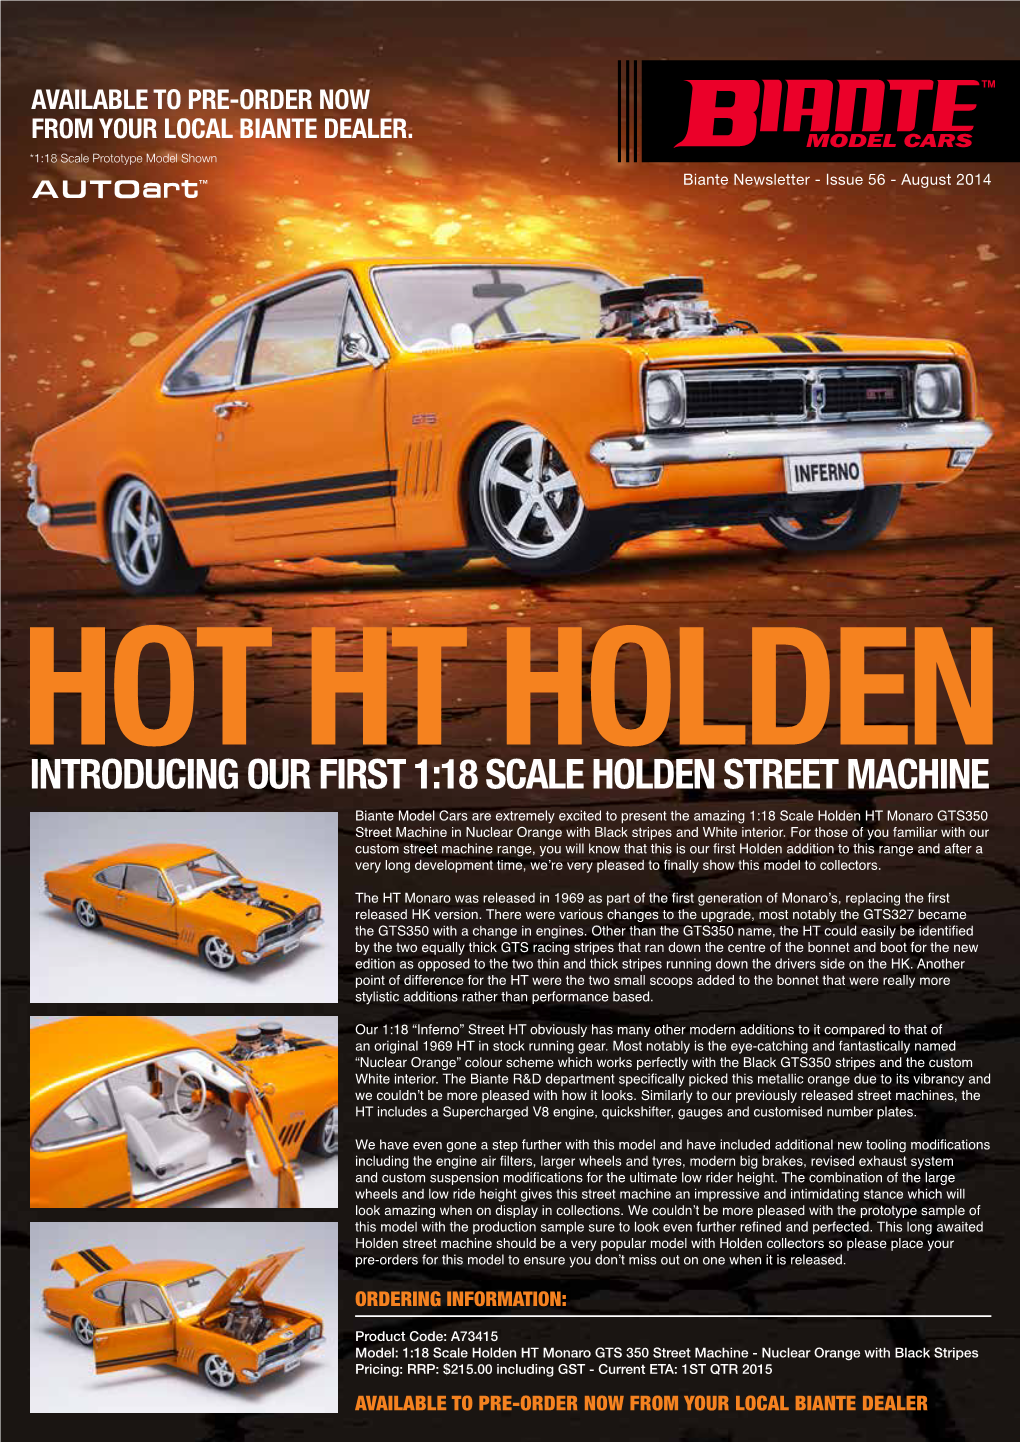 Introducing Our First 1:18 Scale Holden Street Machine